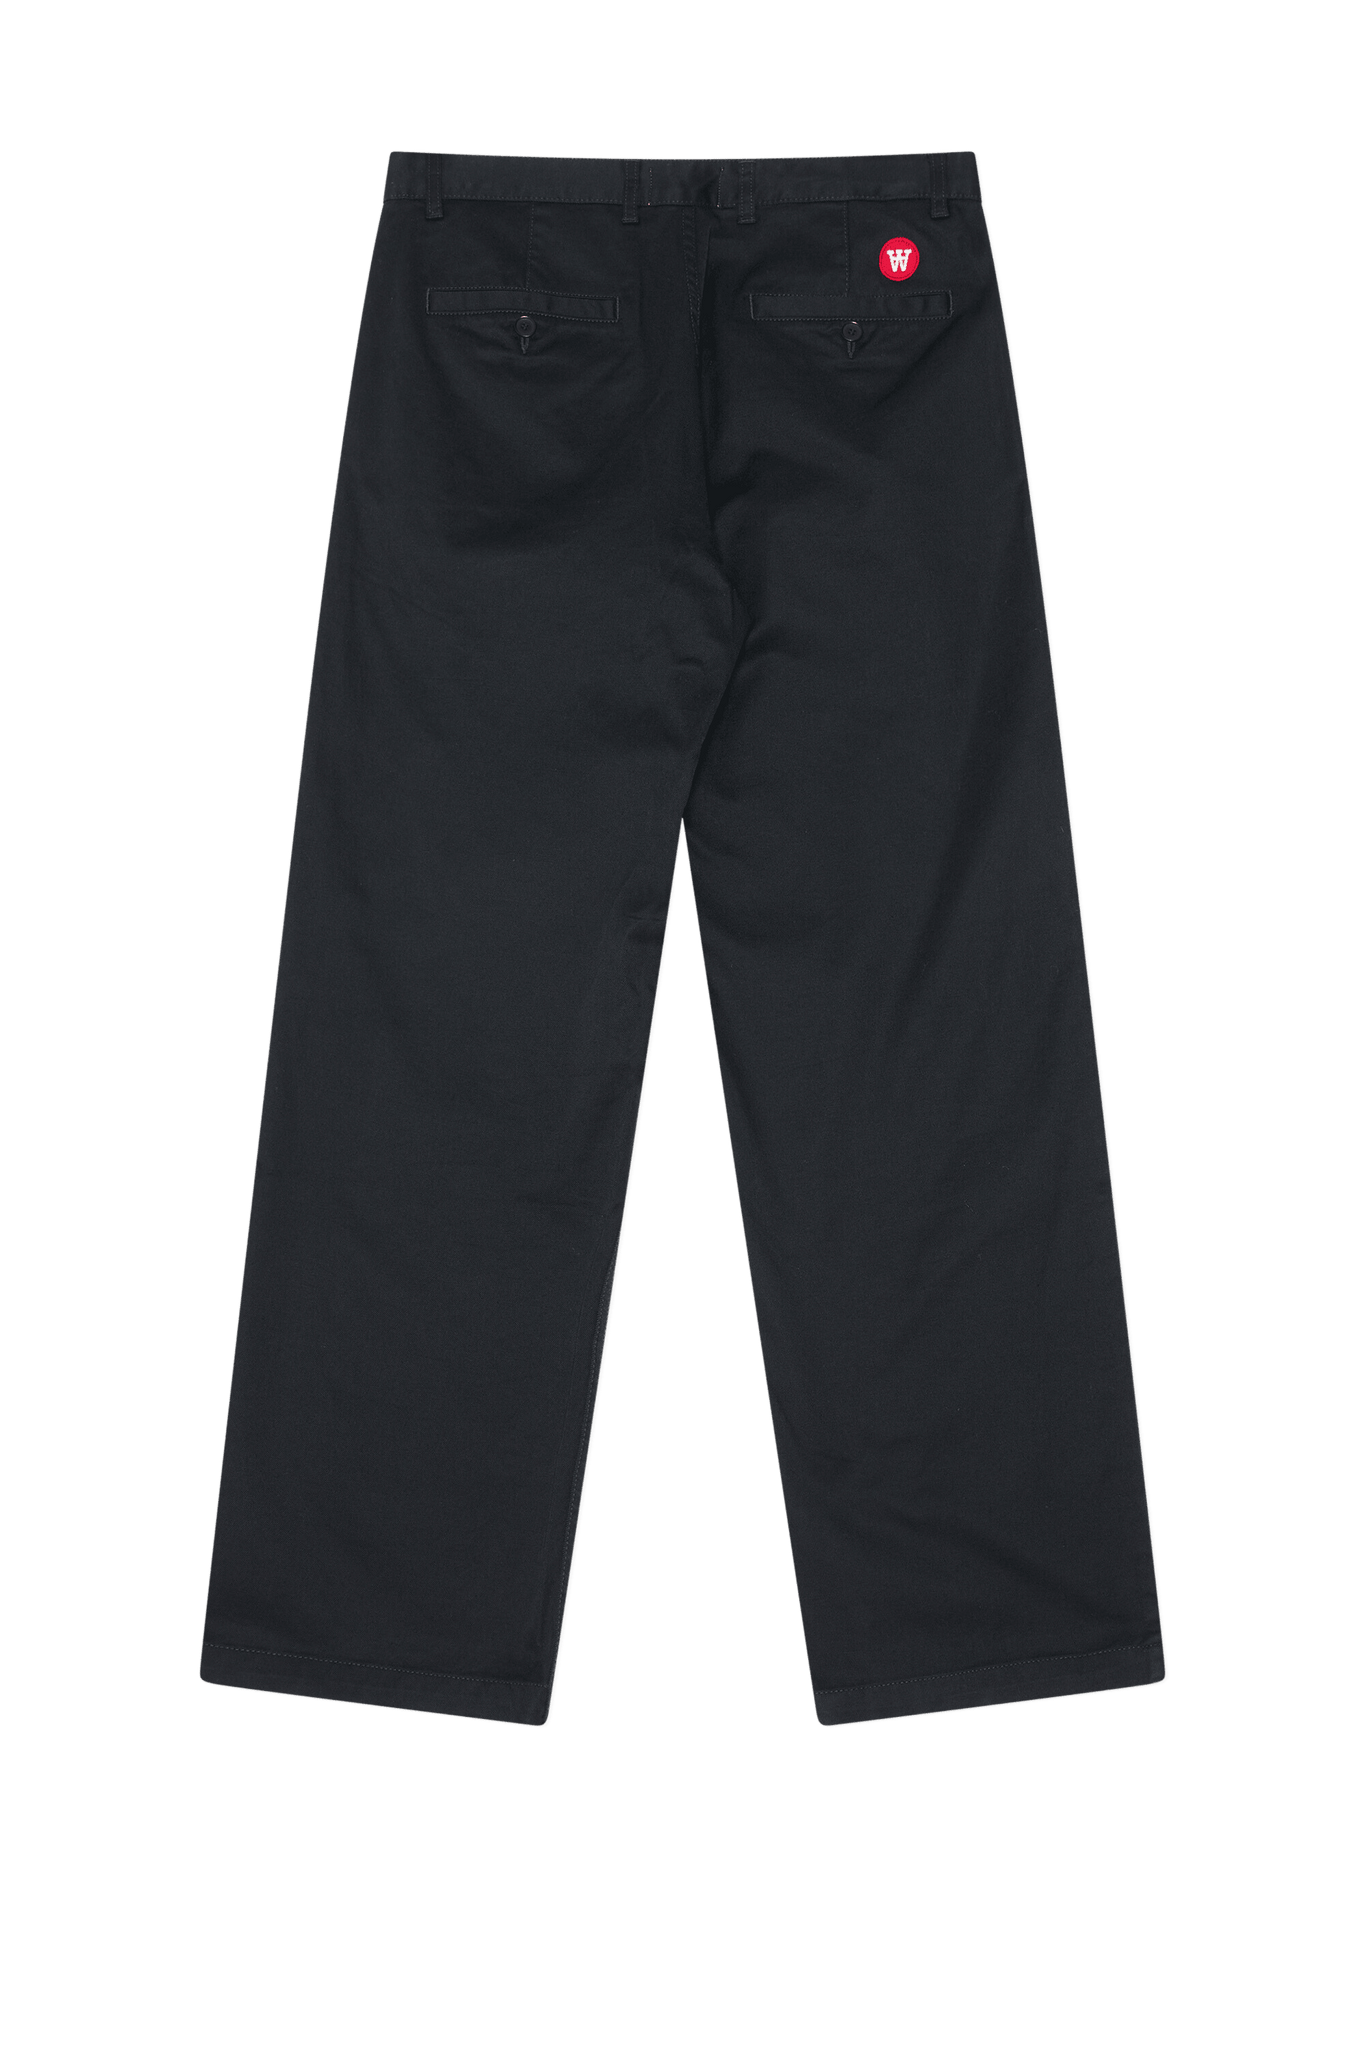 Pantalones Double A by Wood Wood Silas Negros - ECRU